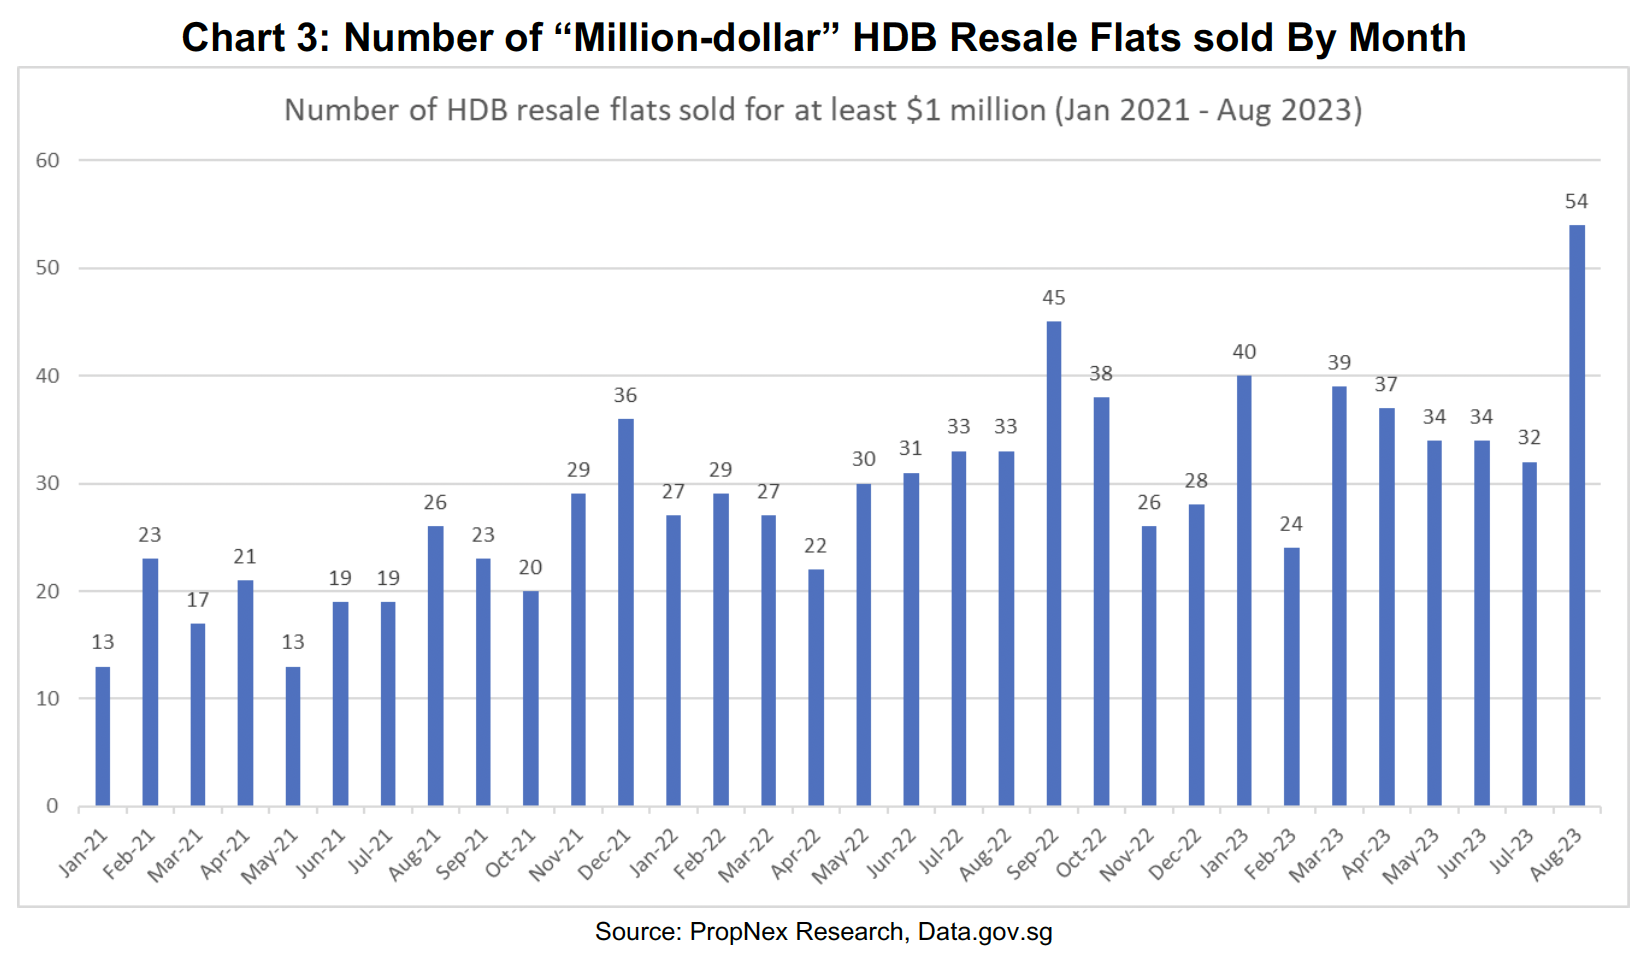 Number of Million-Dollar HDB Resale Flats sold by Month